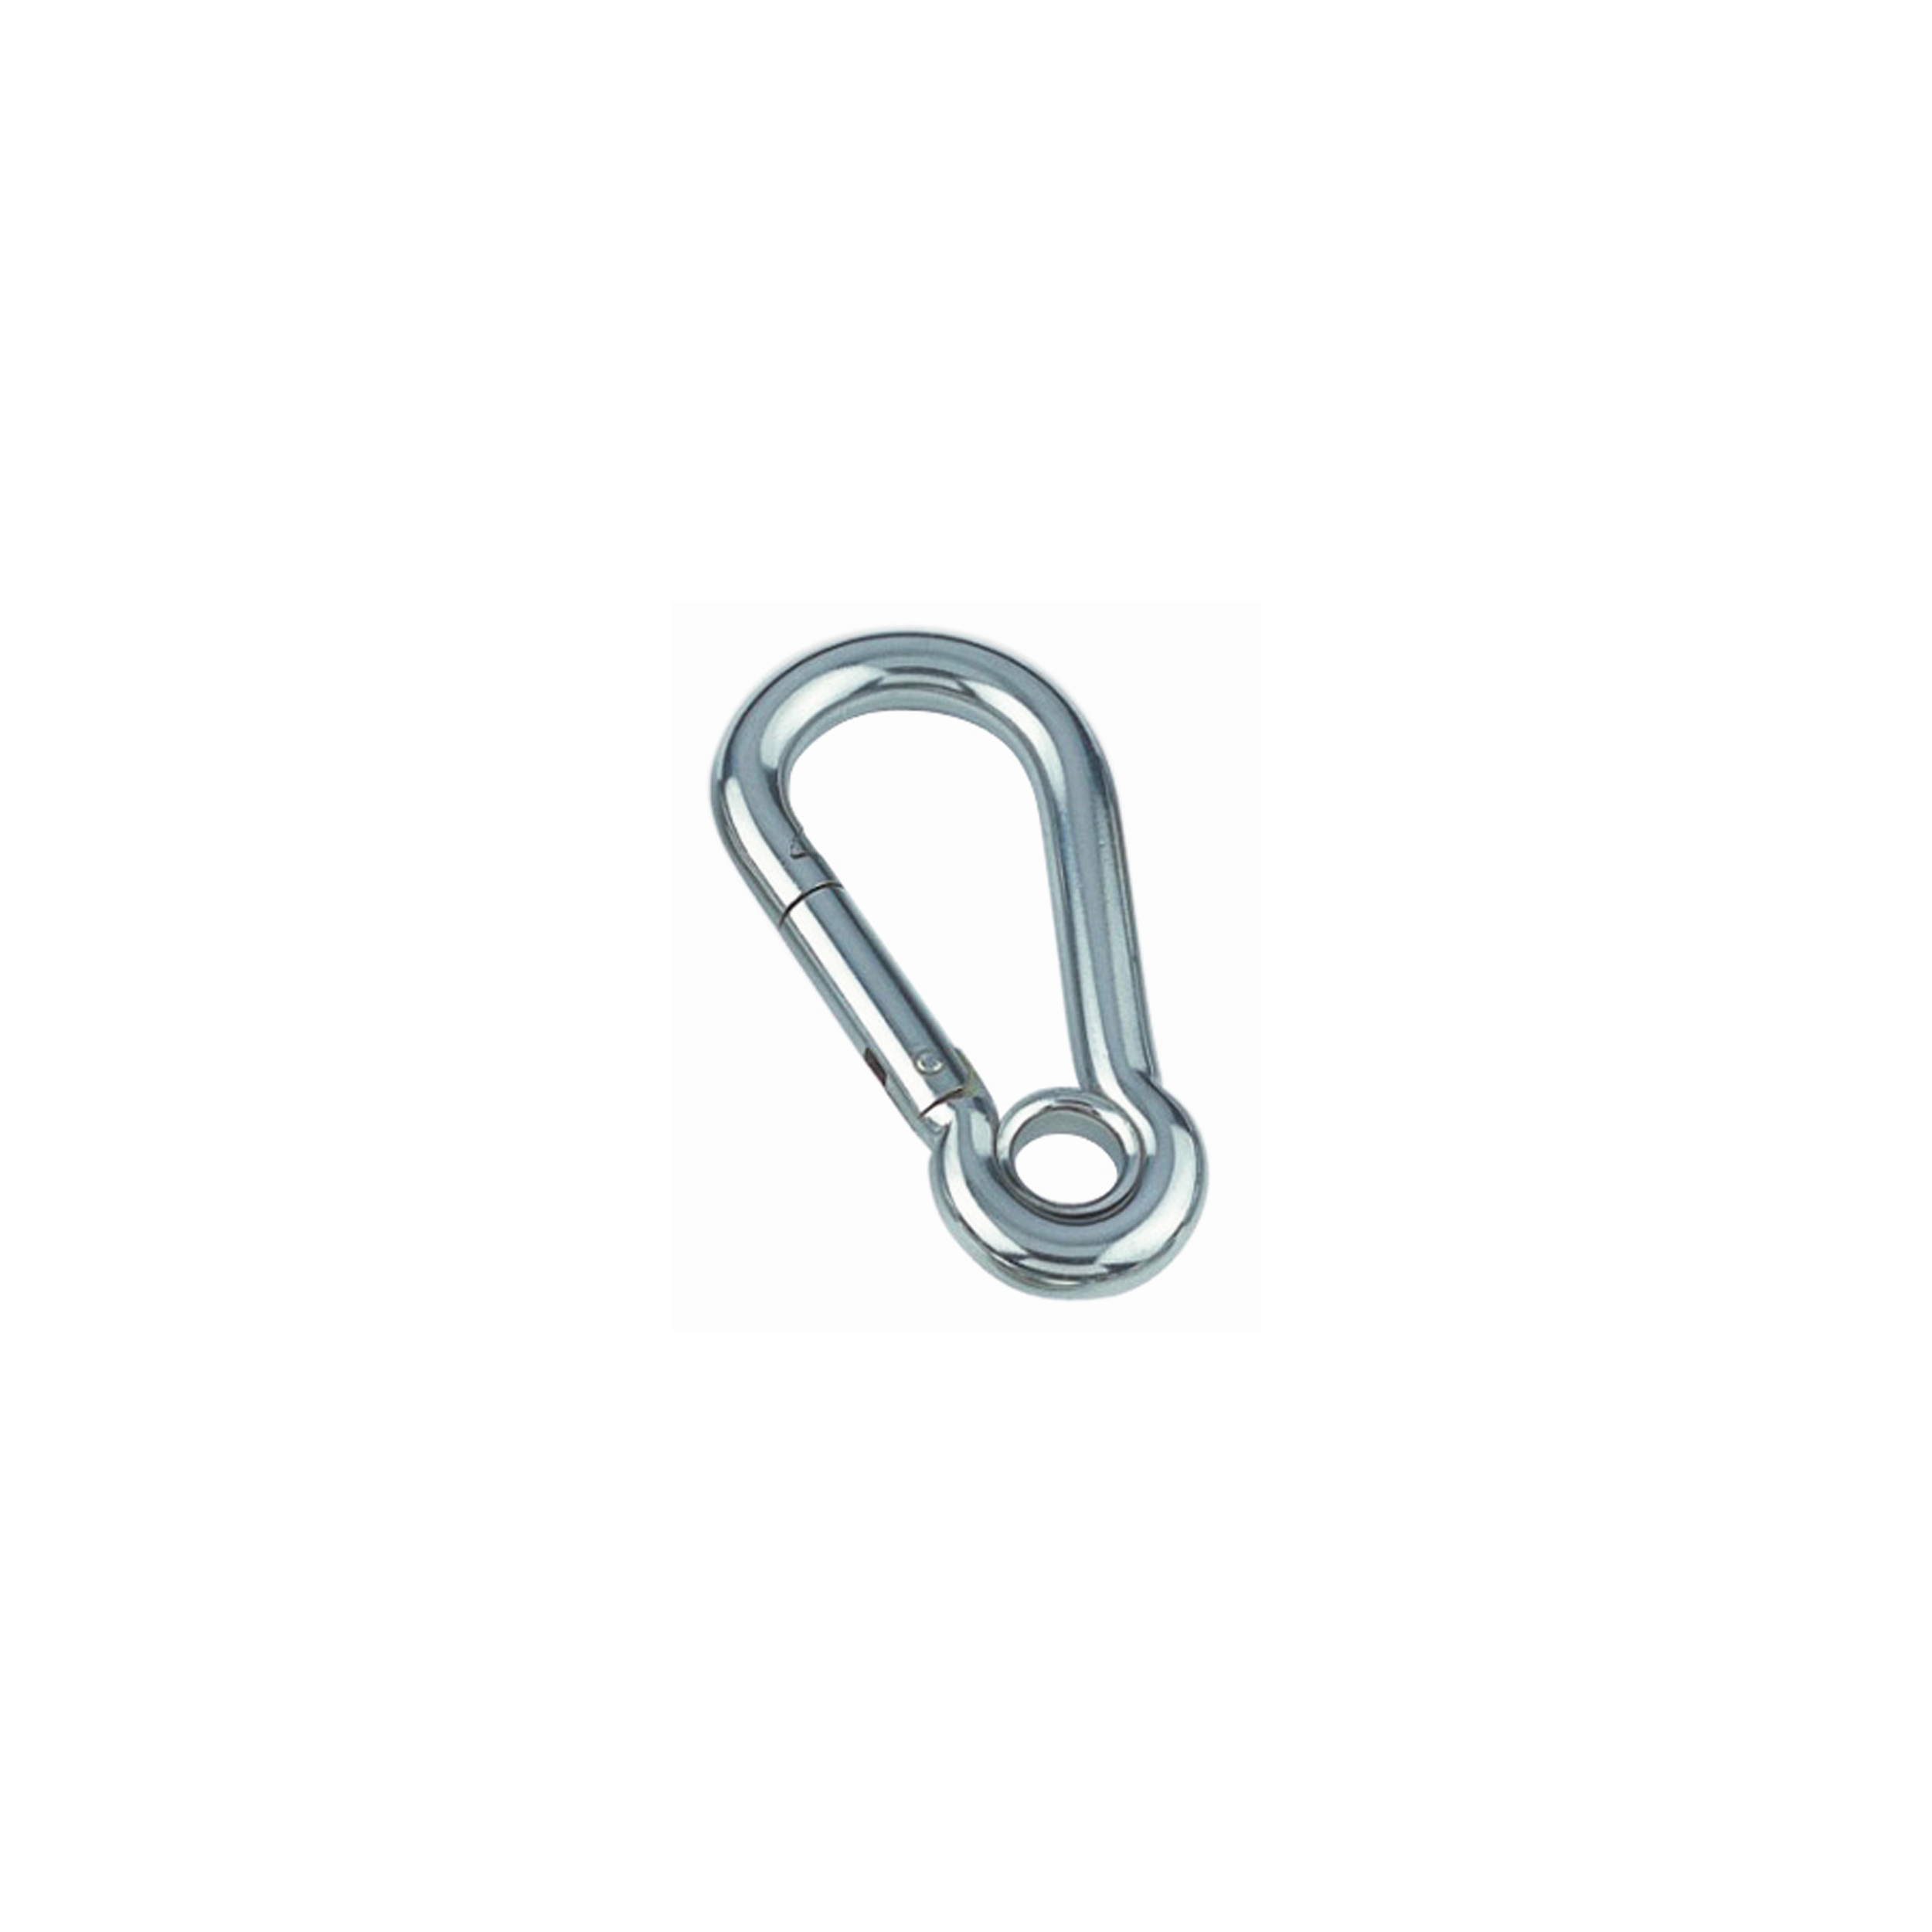 10 STCK / PCS. Spring hook with eyelet A4  5x50mm